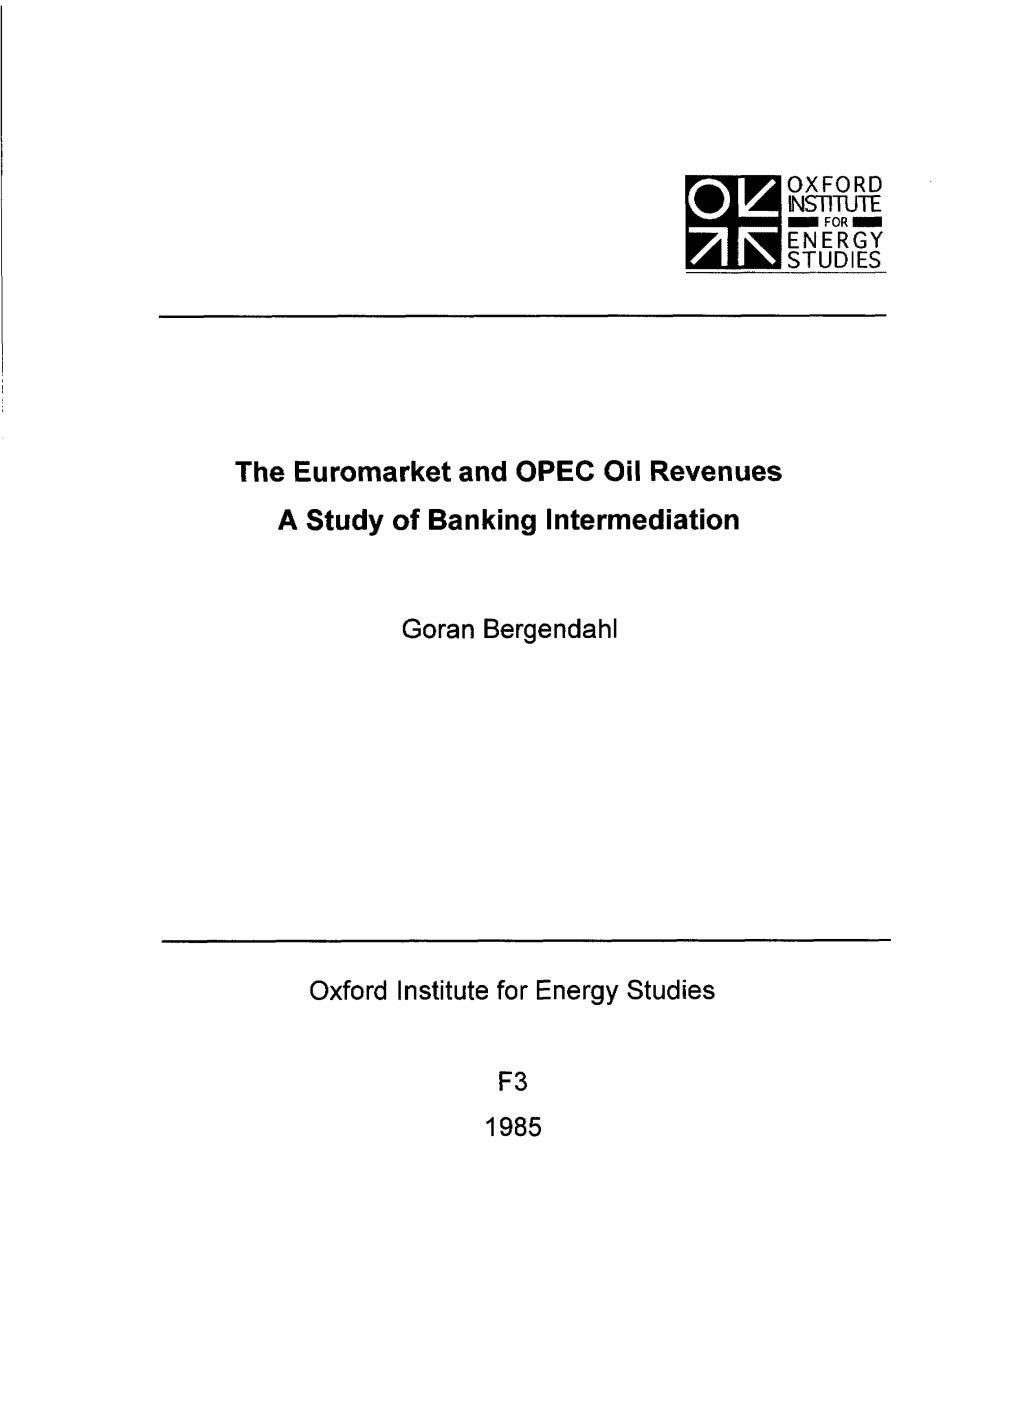 The Euromarket and OPEC Oil Revenues a Study of Banking Intermediation